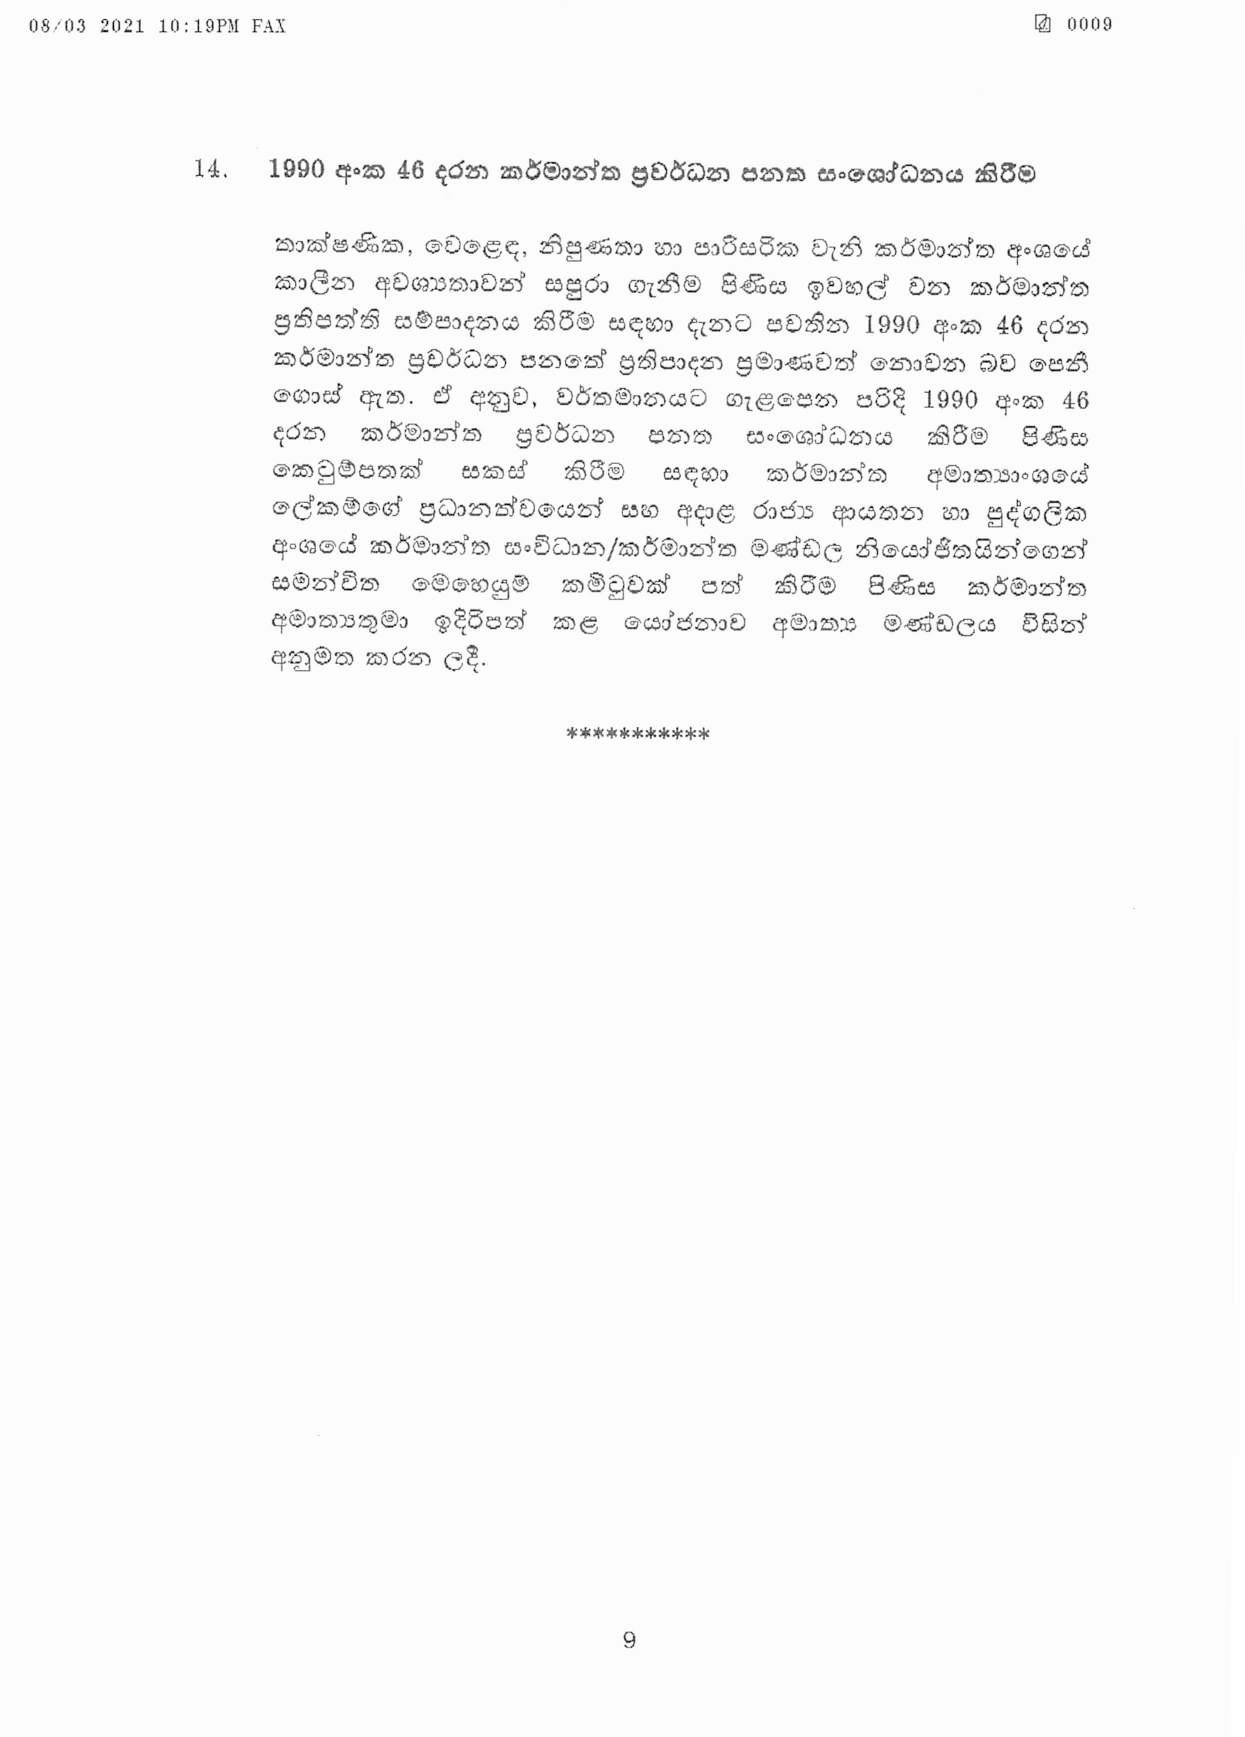 Cabinet Decision on 08.03.2021 compressed page 009